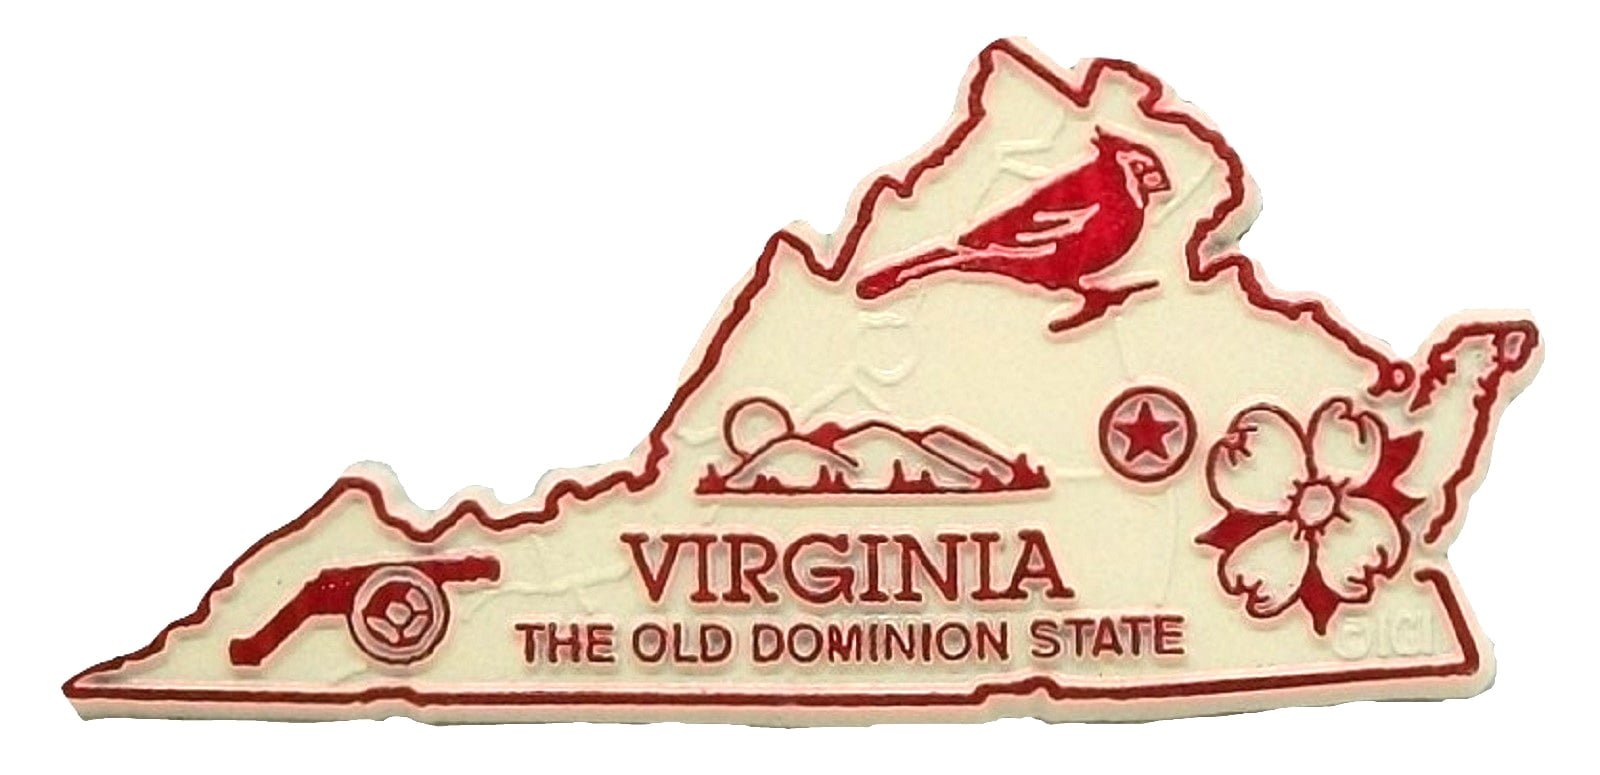 Virginia The Old Dominion State Montage Fridge Magnet 